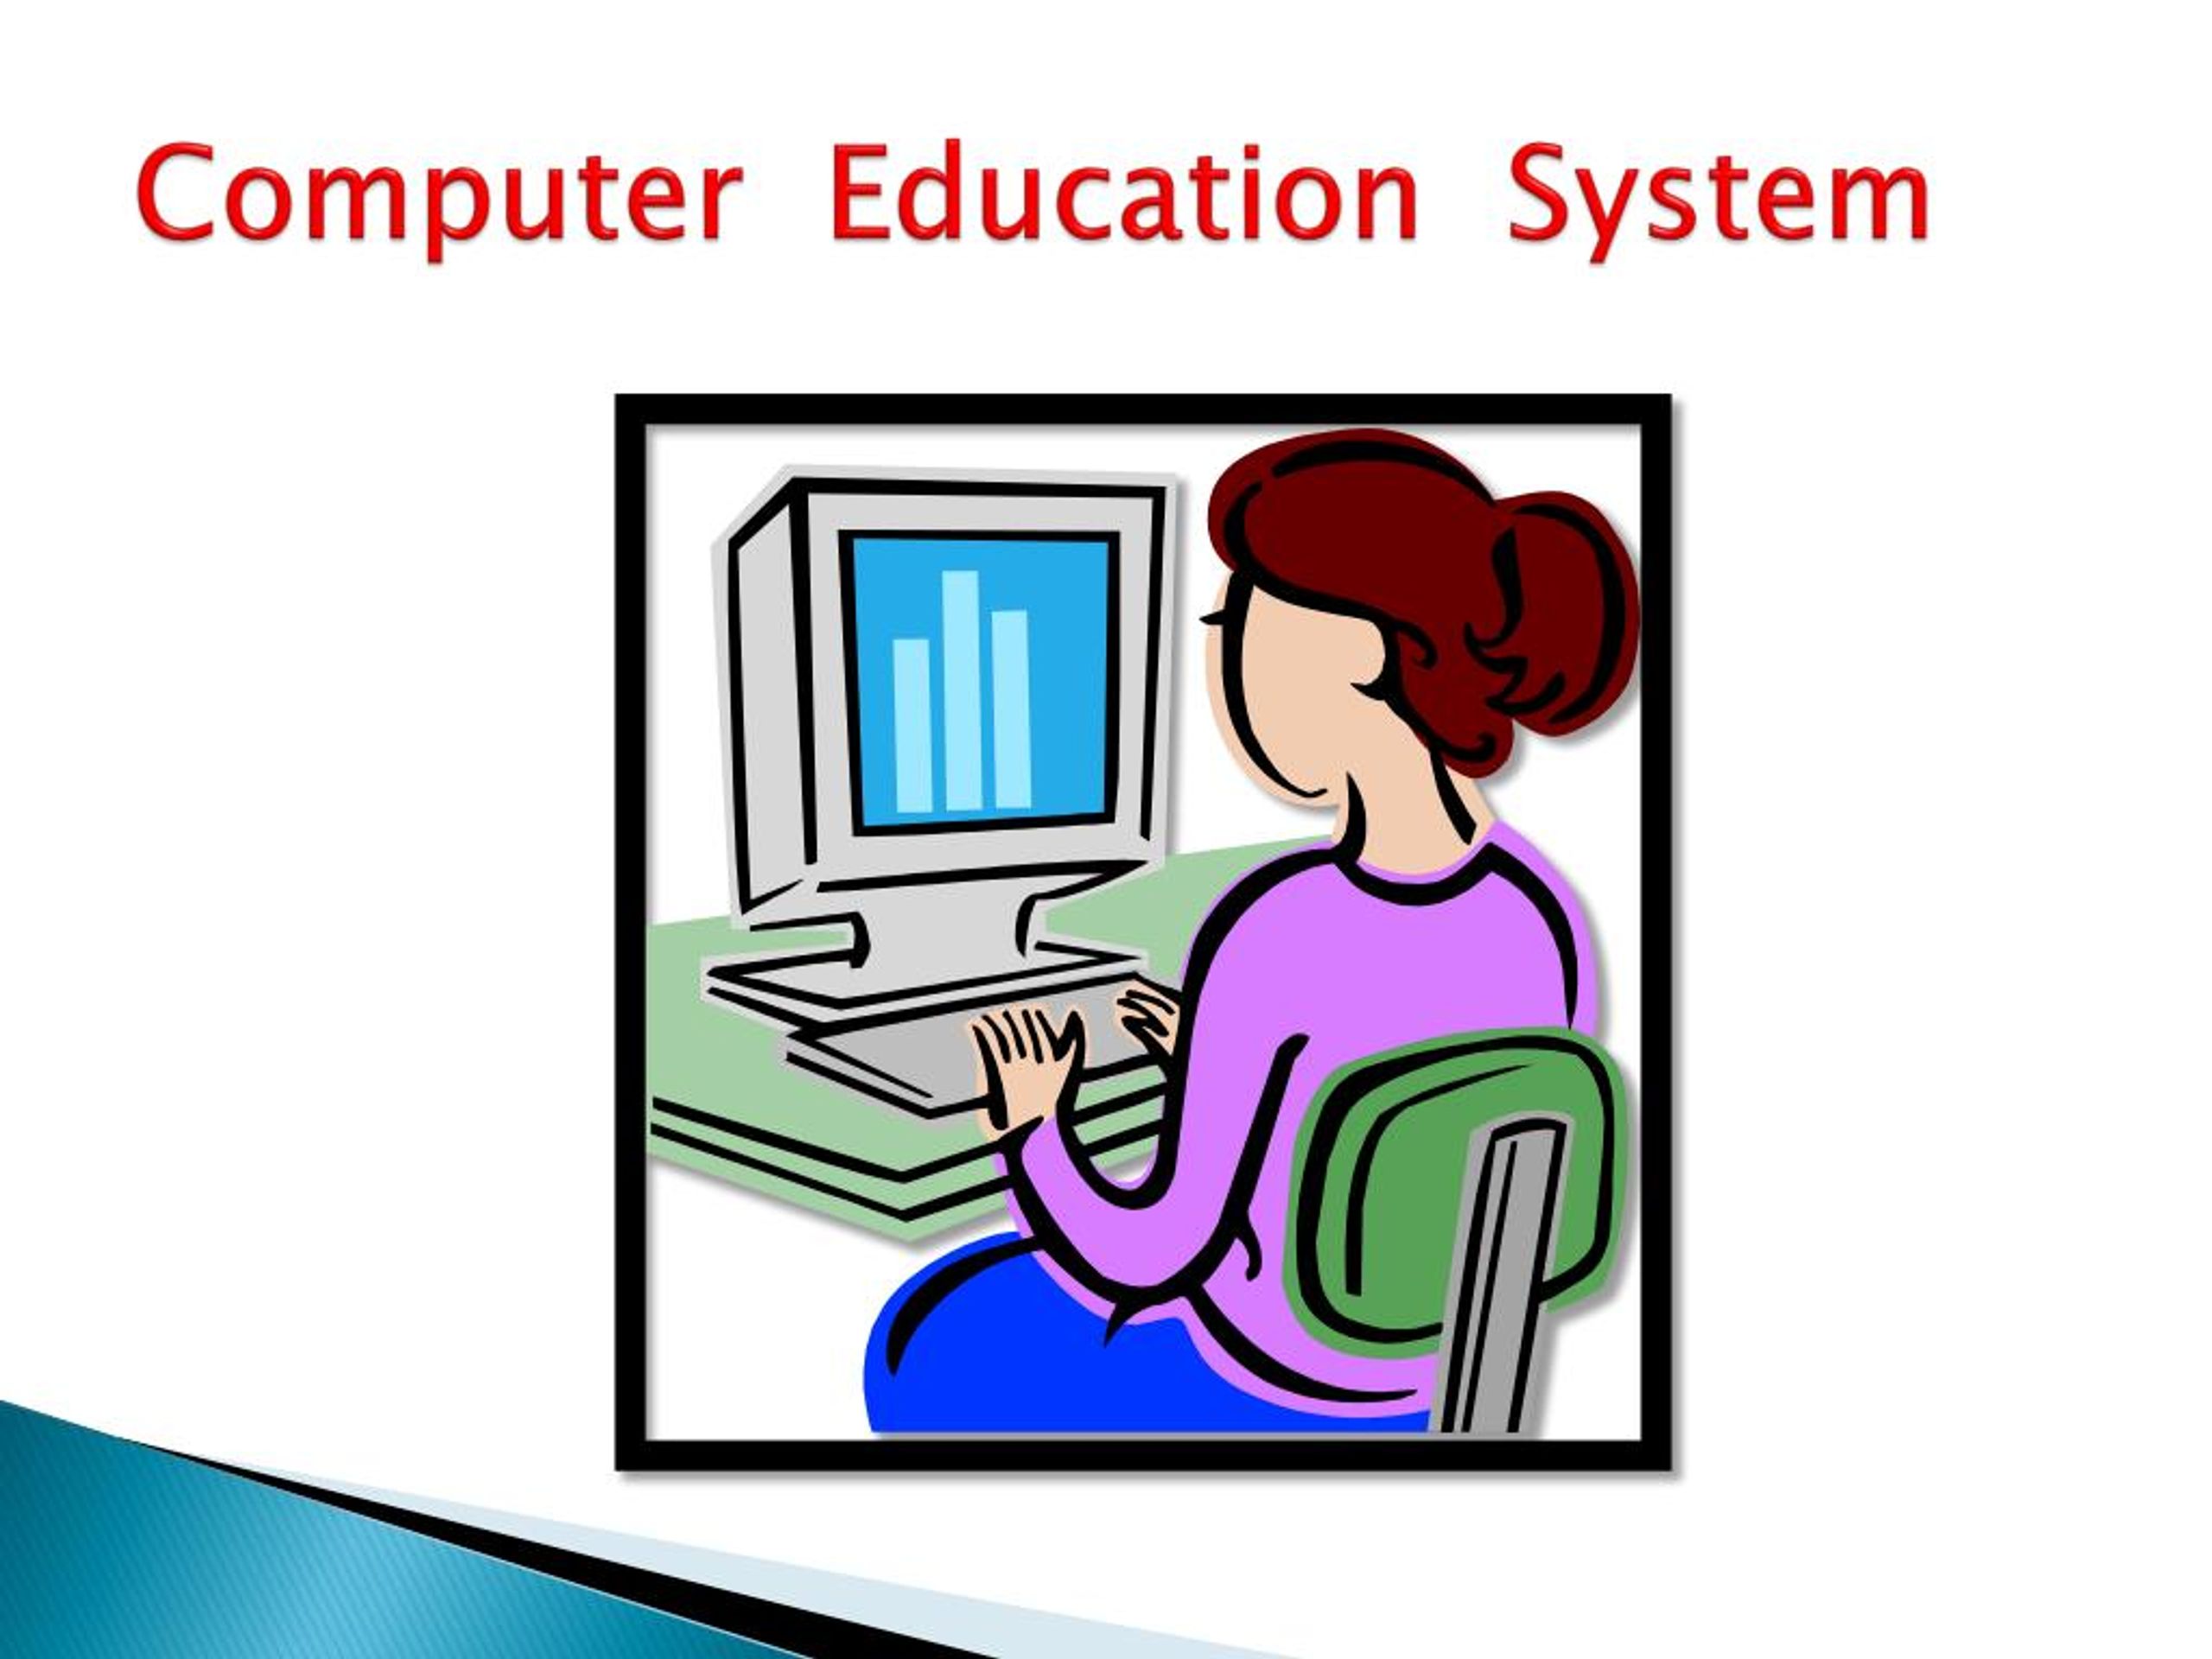 computer use in education ppt